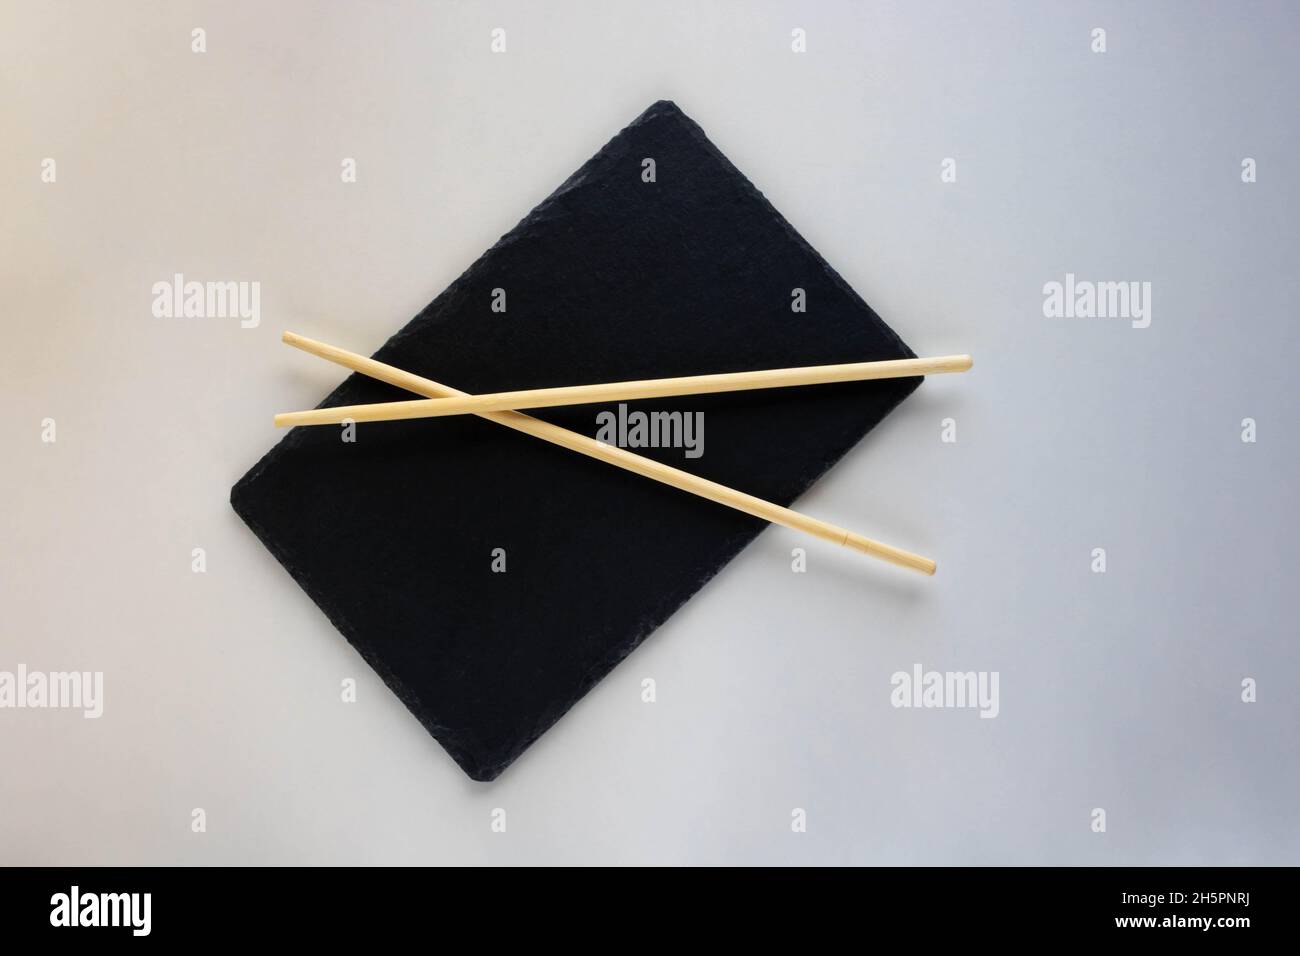 Asian cuisine is a Black Slate plate with chopsticks. An empty sushi plate on a white table. Stock Photo